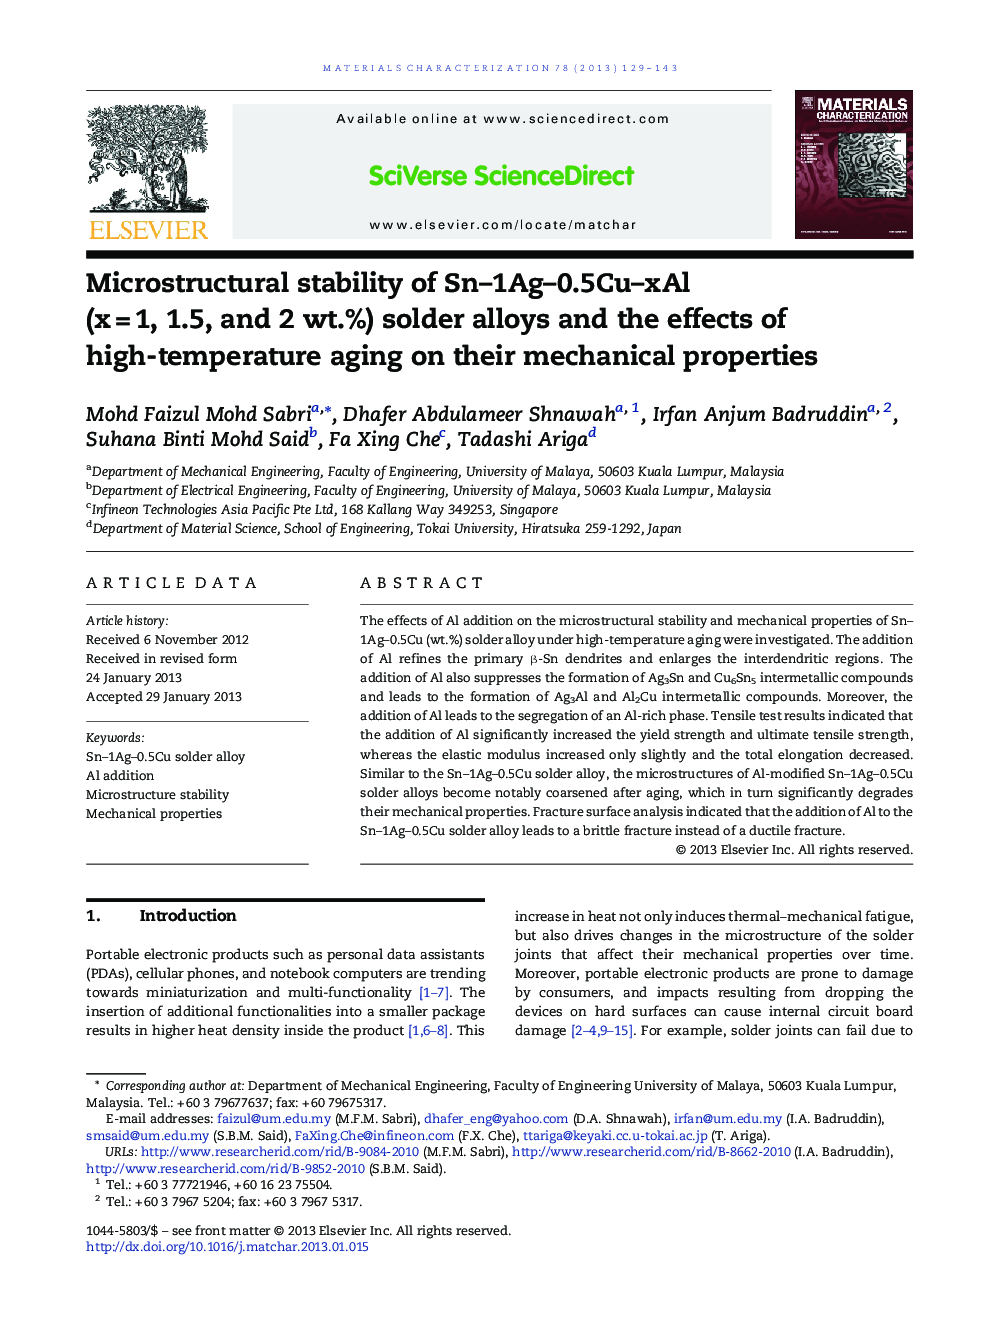 Microstructural stability of Sn-1Ag-0.5Cu-xAl (xÂ =Â 1, 1.5, and 2Â wt.%) solder alloys and the effects of high-temperature aging on their mechanical properties